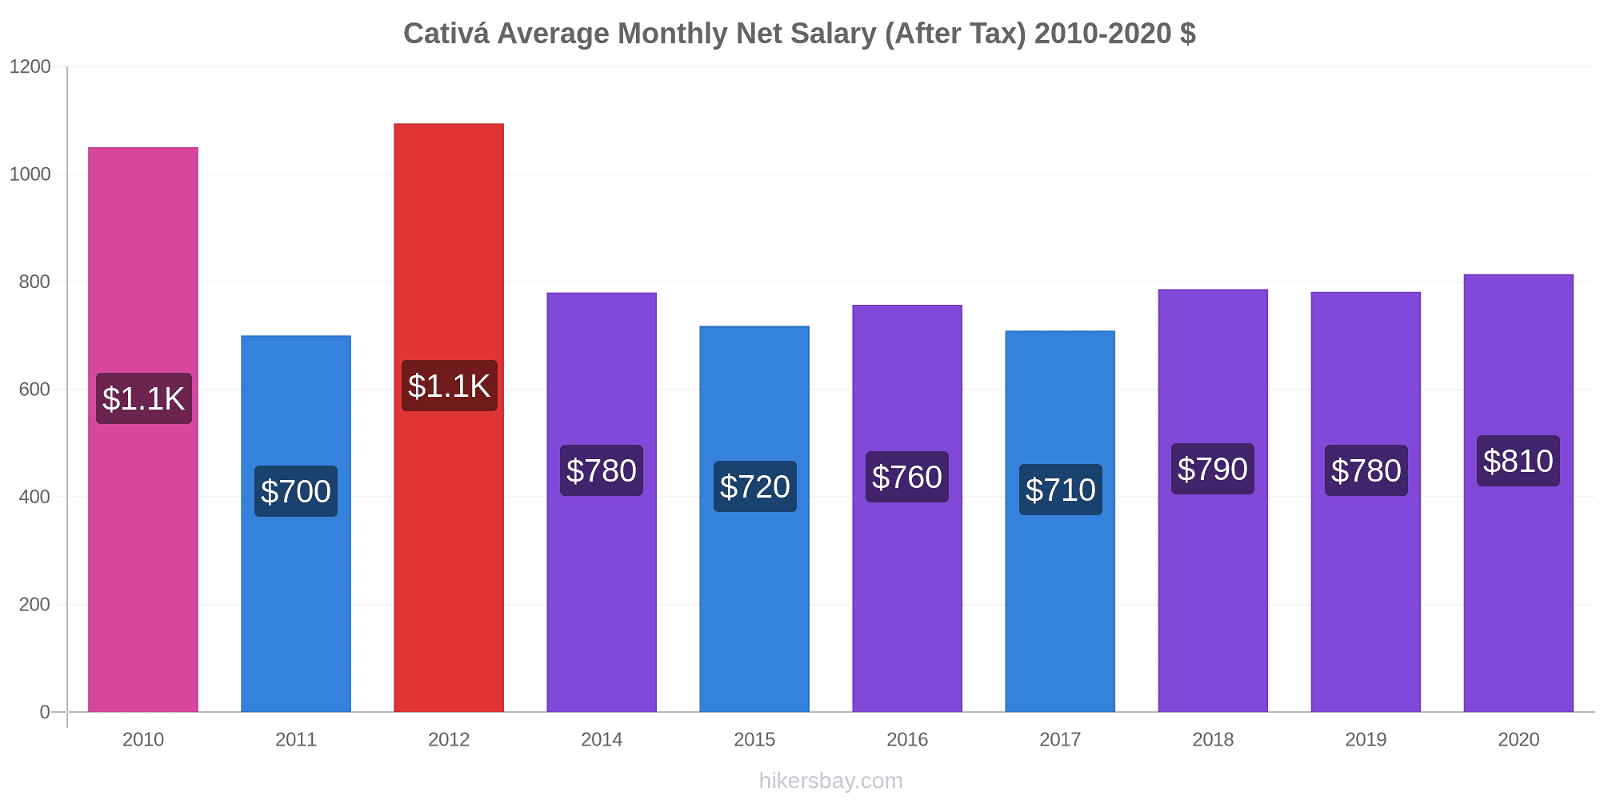 Cativá price changes Average Monthly Net Salary (After Tax) hikersbay.com